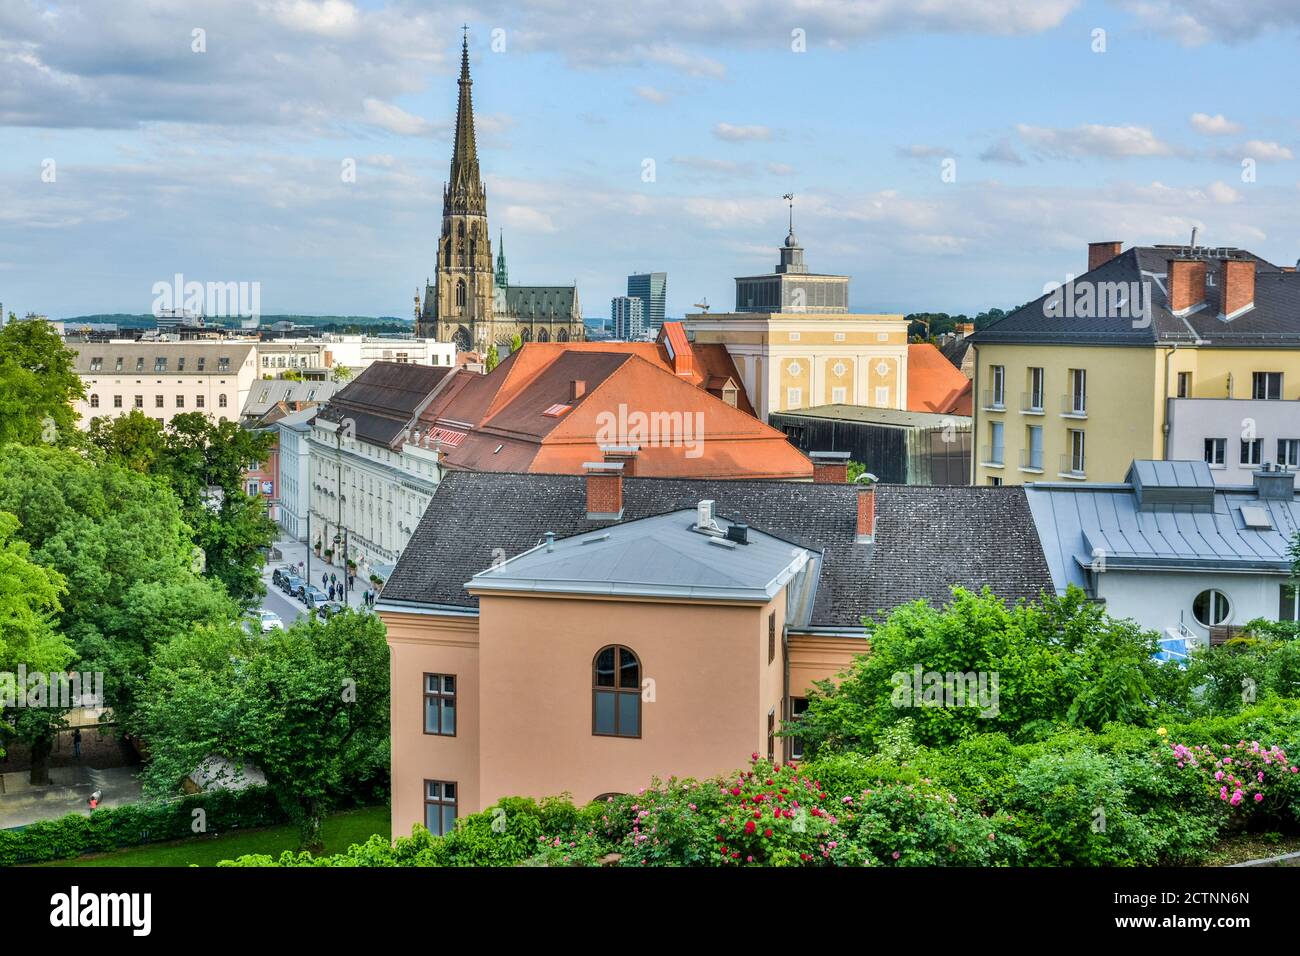 Linz, Austria – May 25, 2017. View over Linz, with steeple of New Cathedral, historic buildings and people. Stock Photo